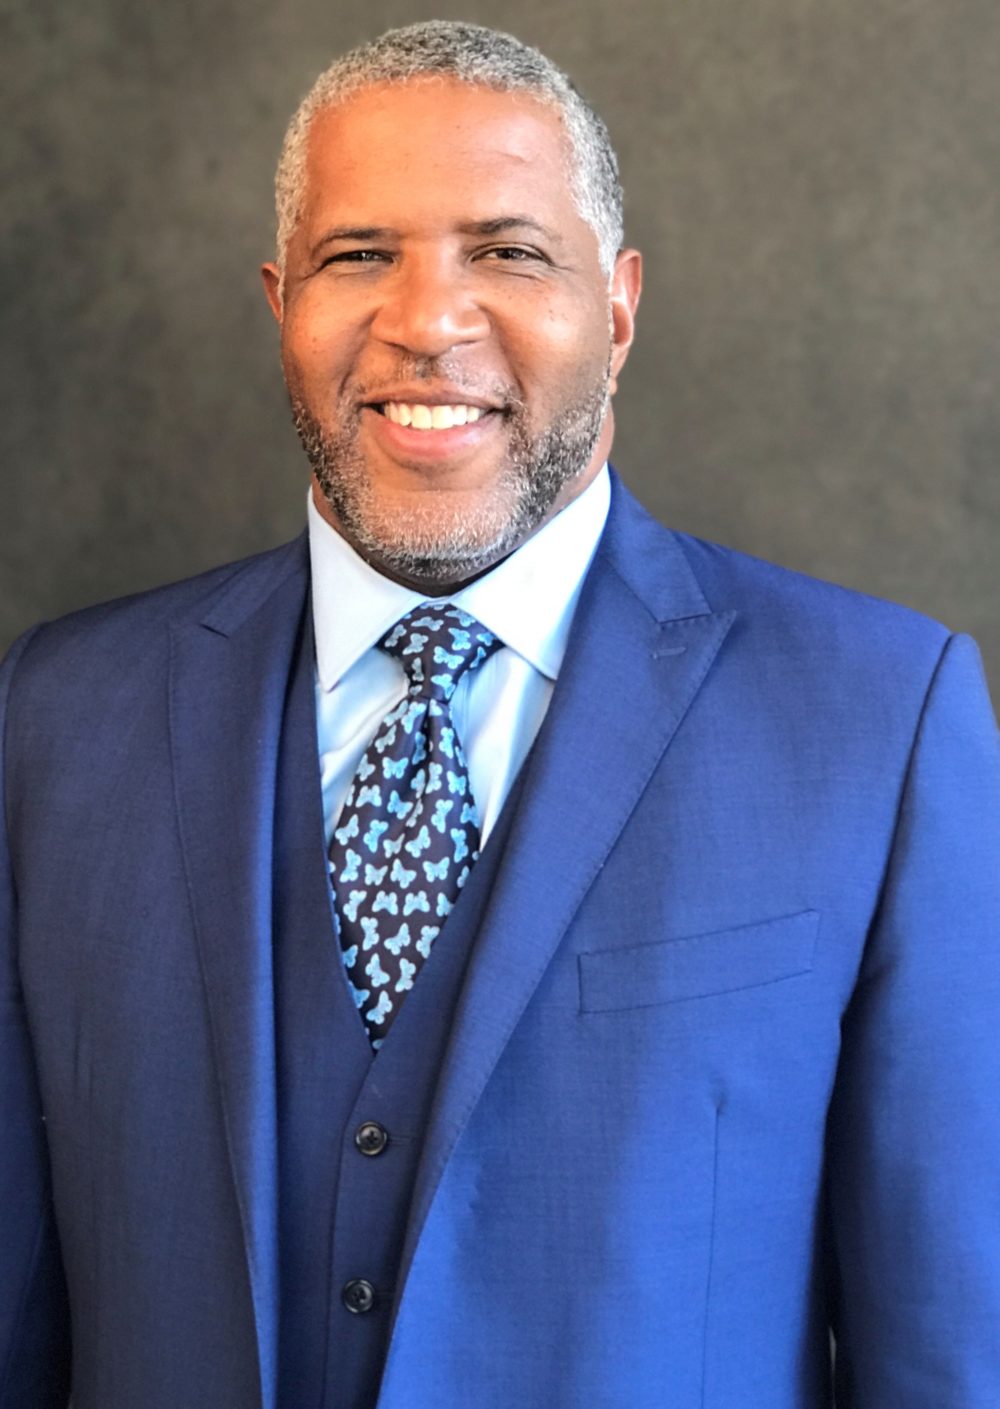 Robert F. Smith: Founder, Chairman & CEO – Vista Equity Partners